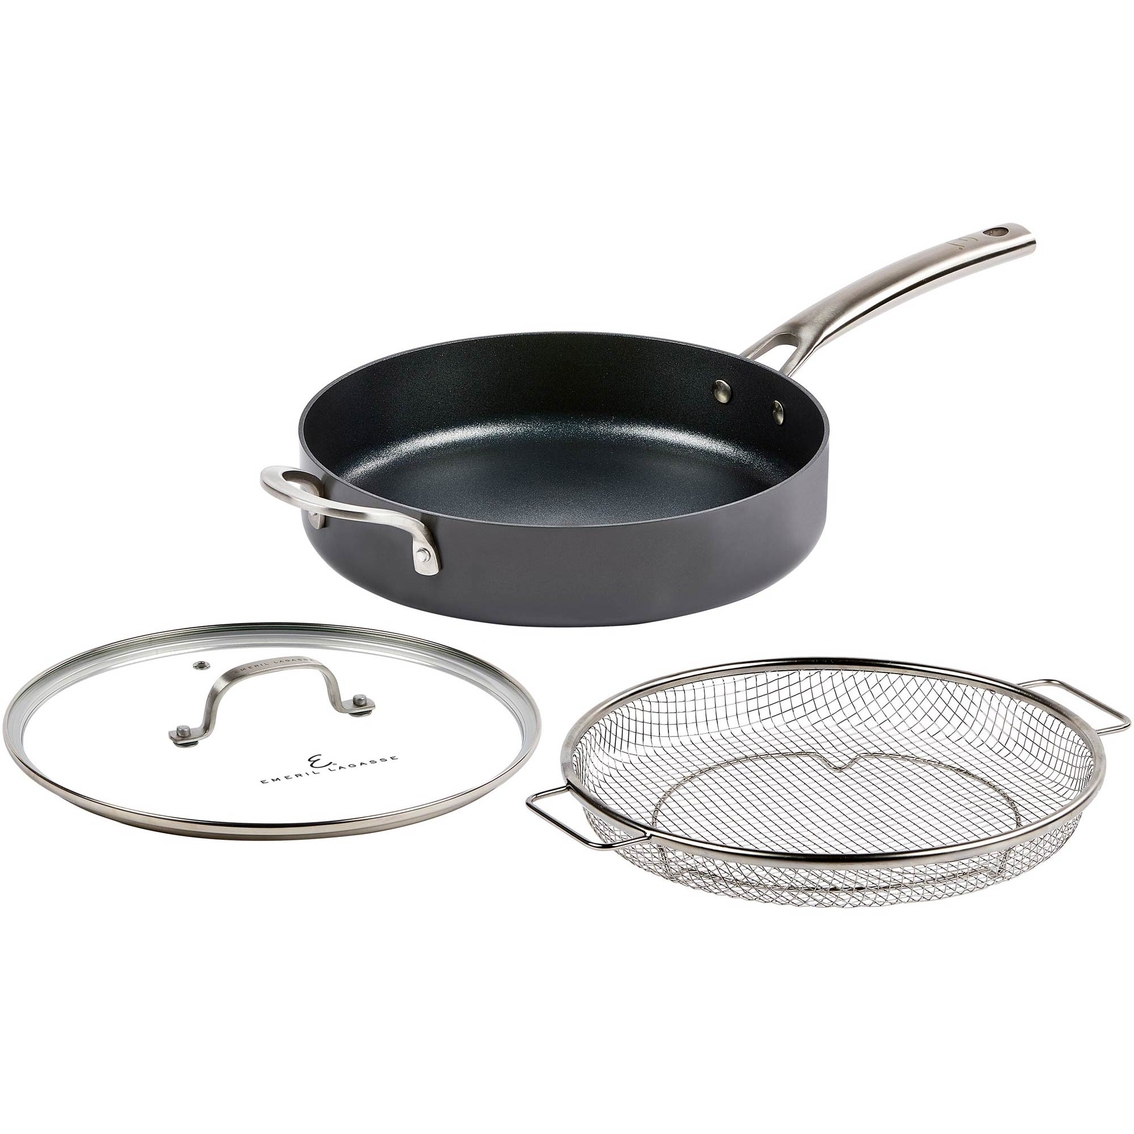 Emeril Forever Pro 11 In. Covered Chicken Fry Pan, Fry Pans & Skillets, Household